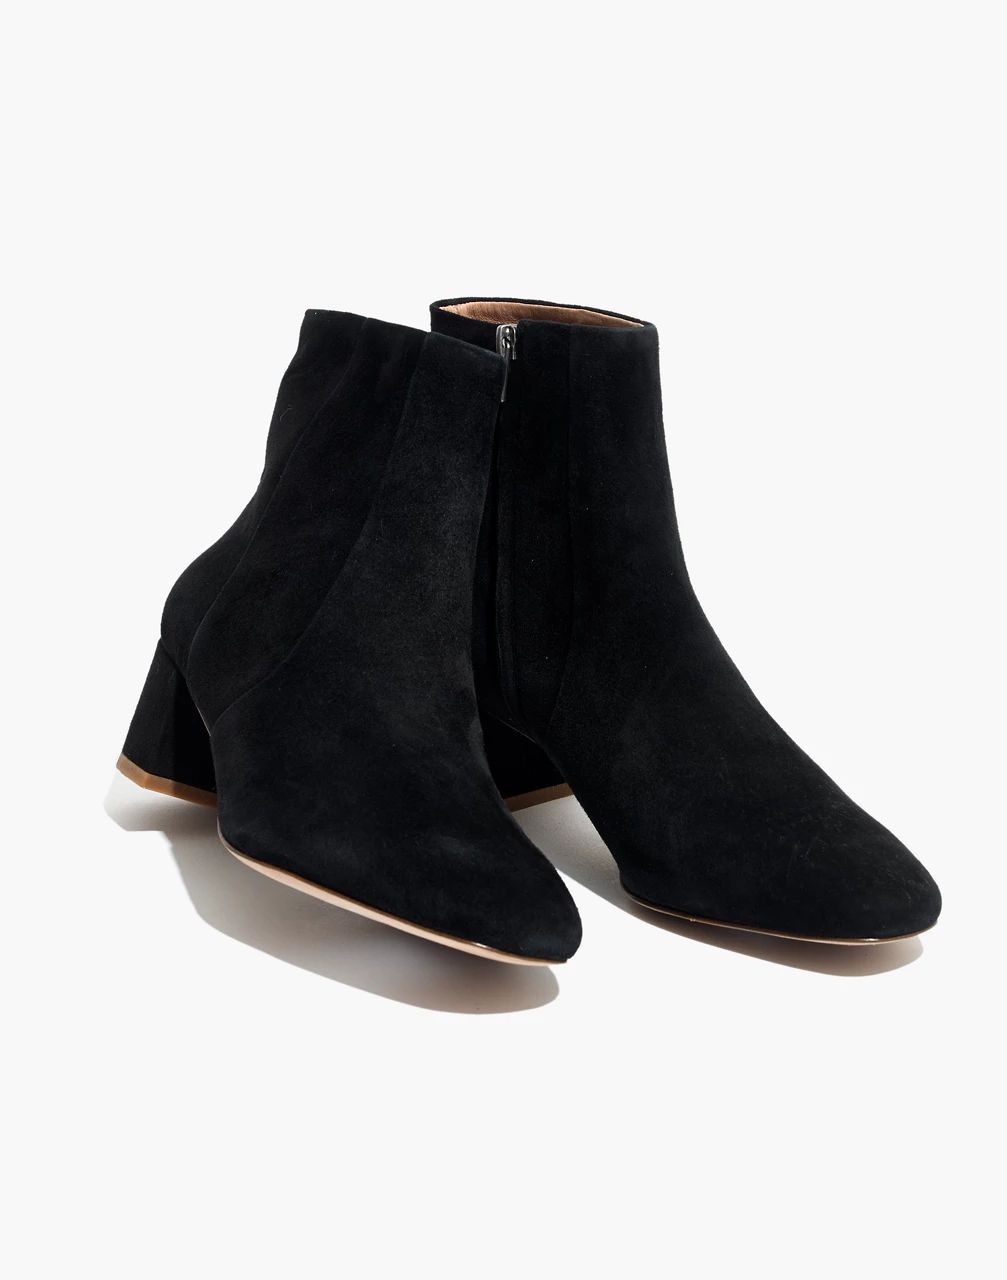 The Jada Boot in Suede | Madewell